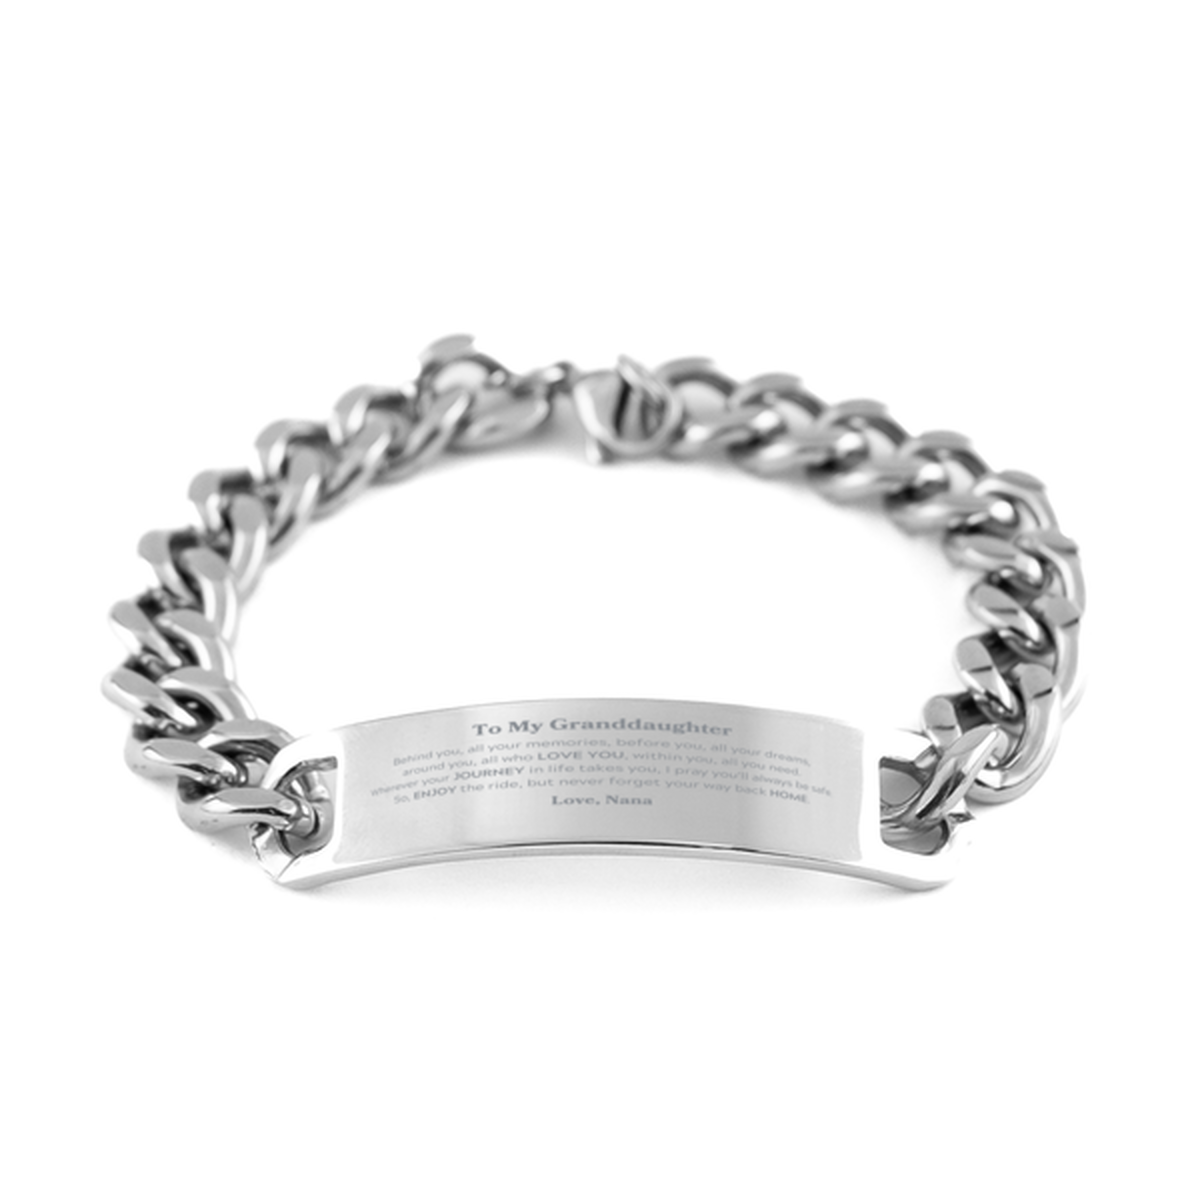 To My Granddaughter Graduation Gifts from Nana, Granddaughter Cuban Chain Stainless Steel Bracelet Christmas Birthday Gifts for Granddaughter Behind you, all your memories, before you, all your dreams. Love, Nana